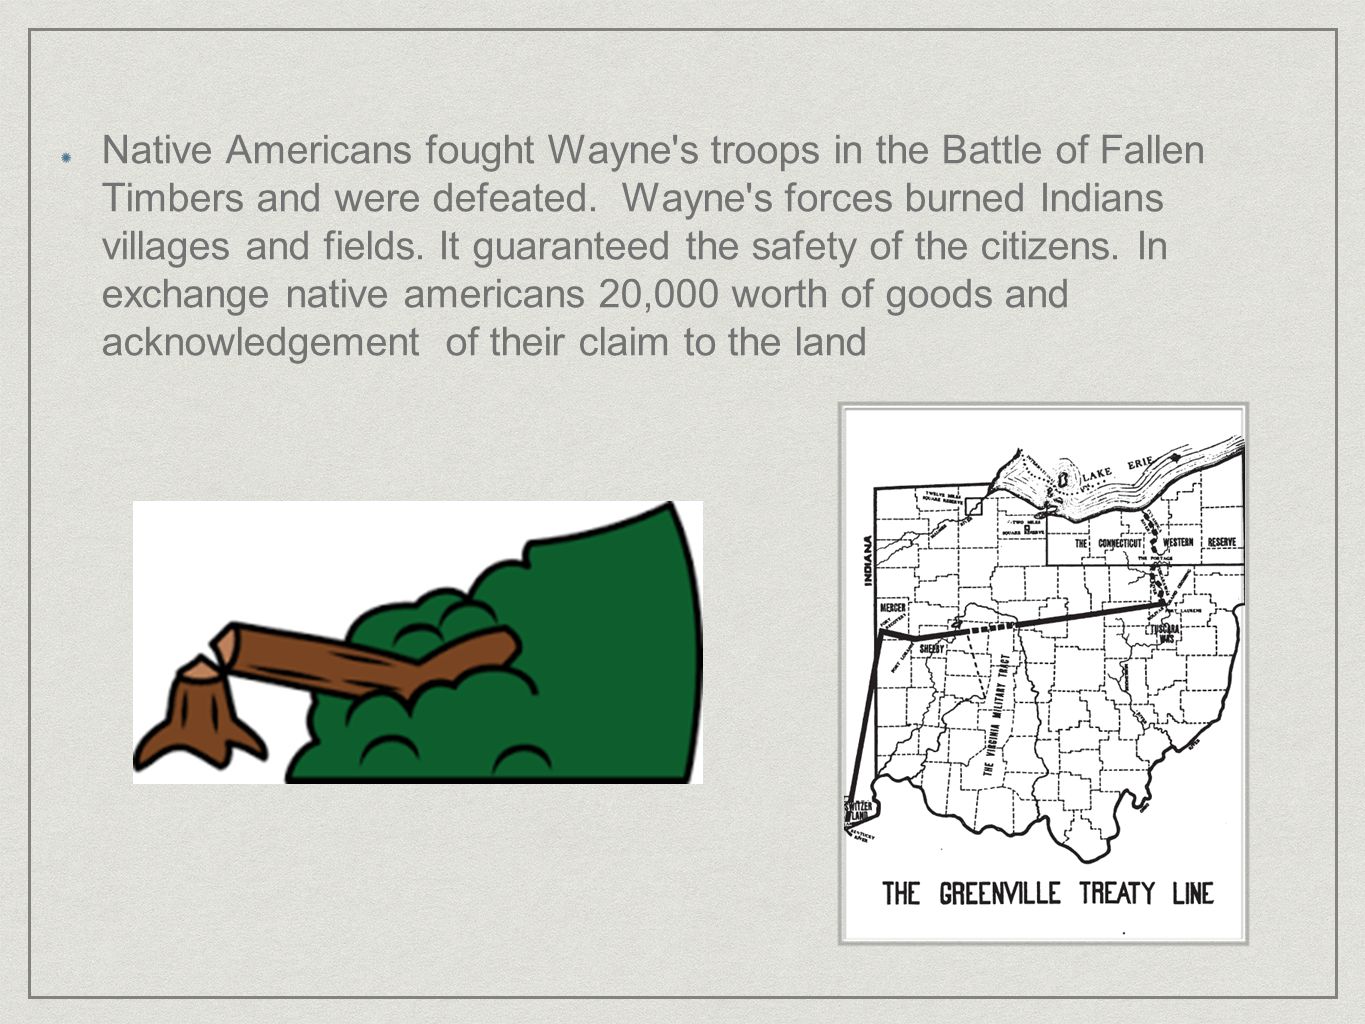 Native Americans fought Wayne s troops in the Battle of Fallen Timbers and were defeated.